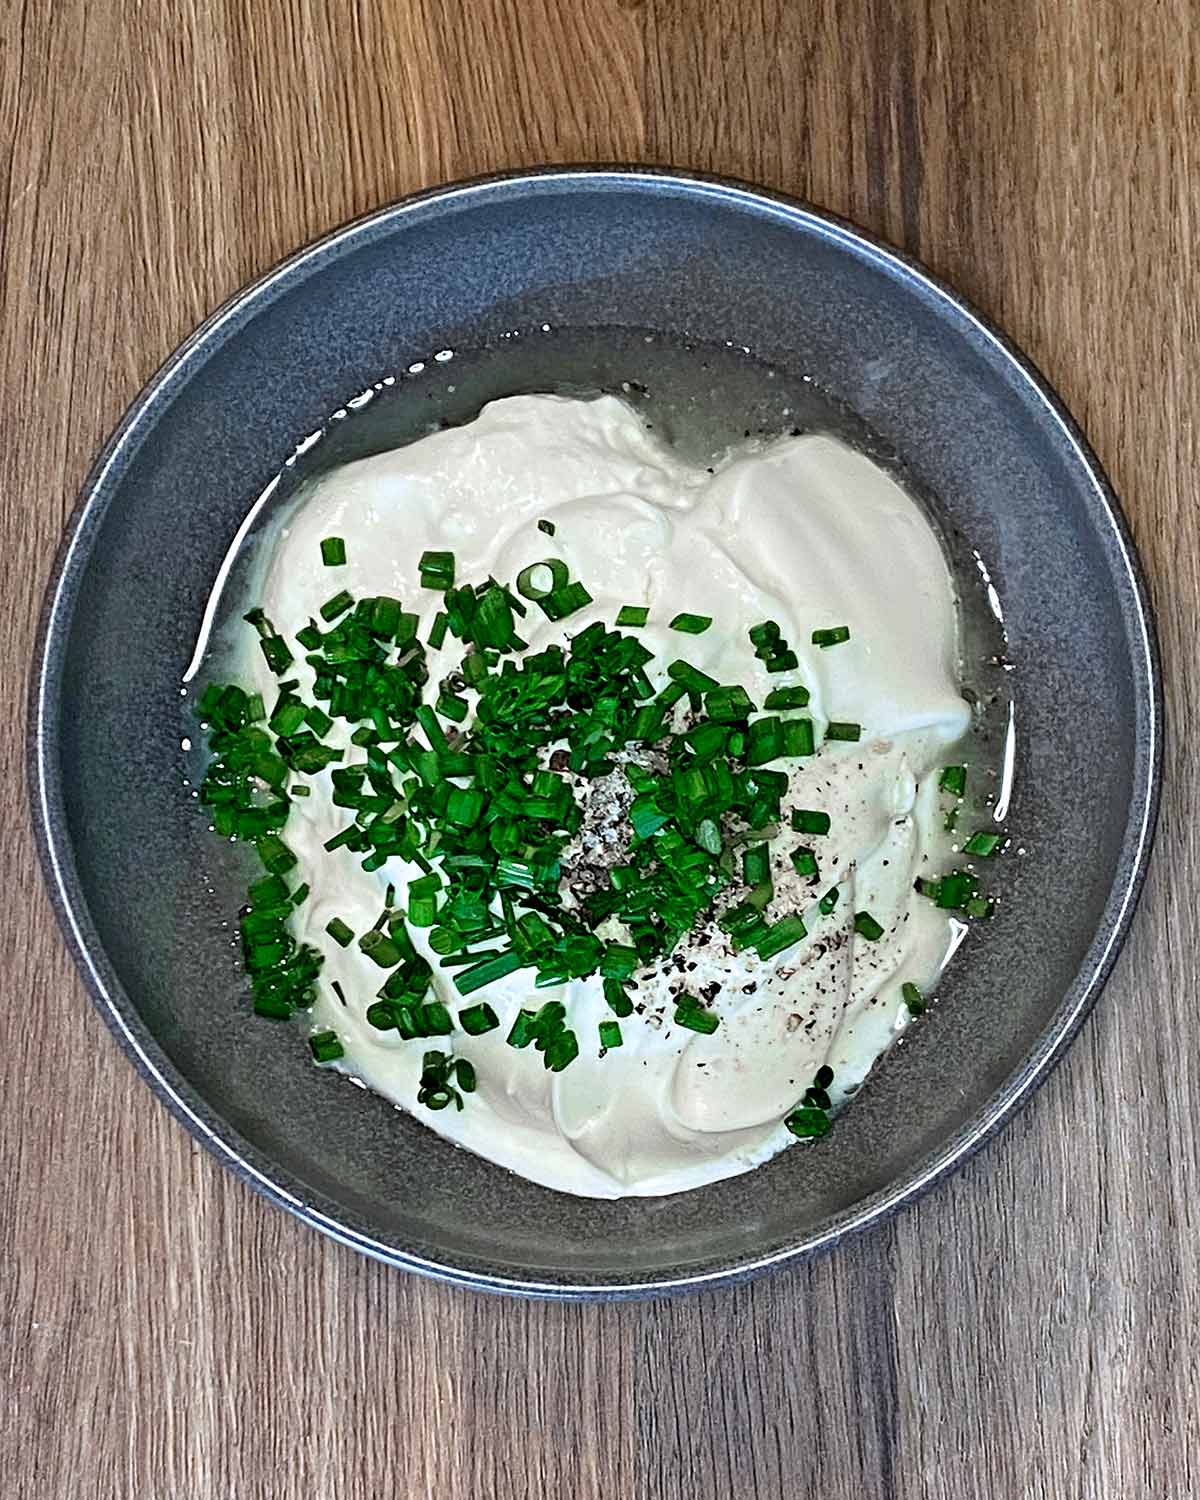 Cream, mayo, lemon juice and chopped chives in a bowl.